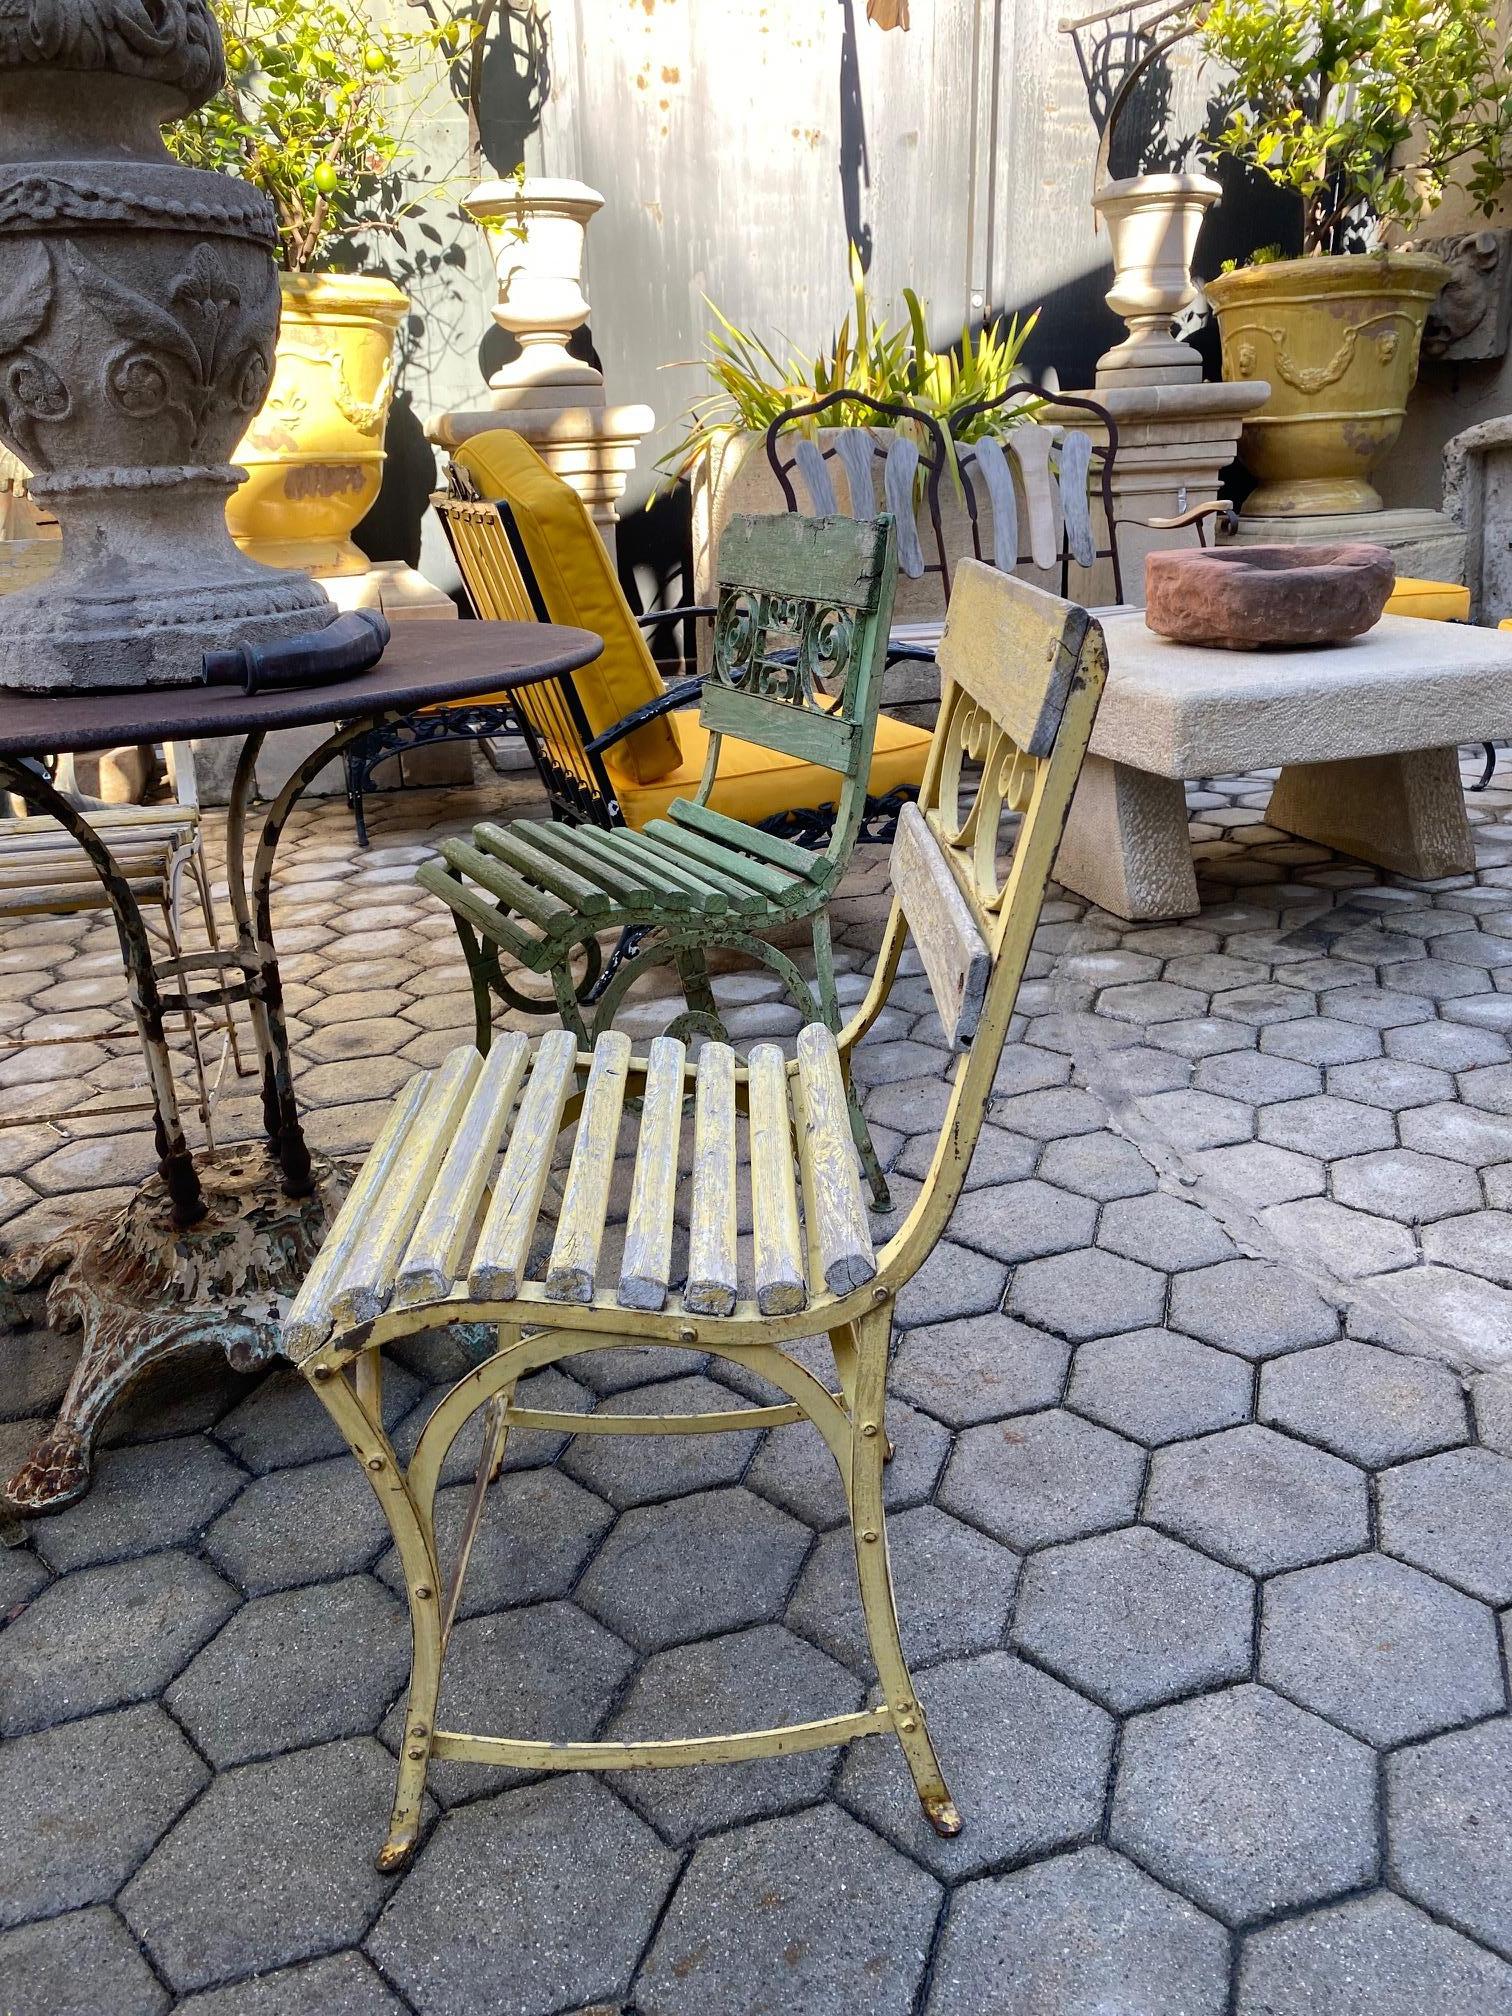 Beautiful 19th century side garden patio iron metal and carved wood chairs with old paint furniture, from the hippodrome horse racing track located in Paris, France. We have total of 2 in yellow color, we have some in the blue and gray color.